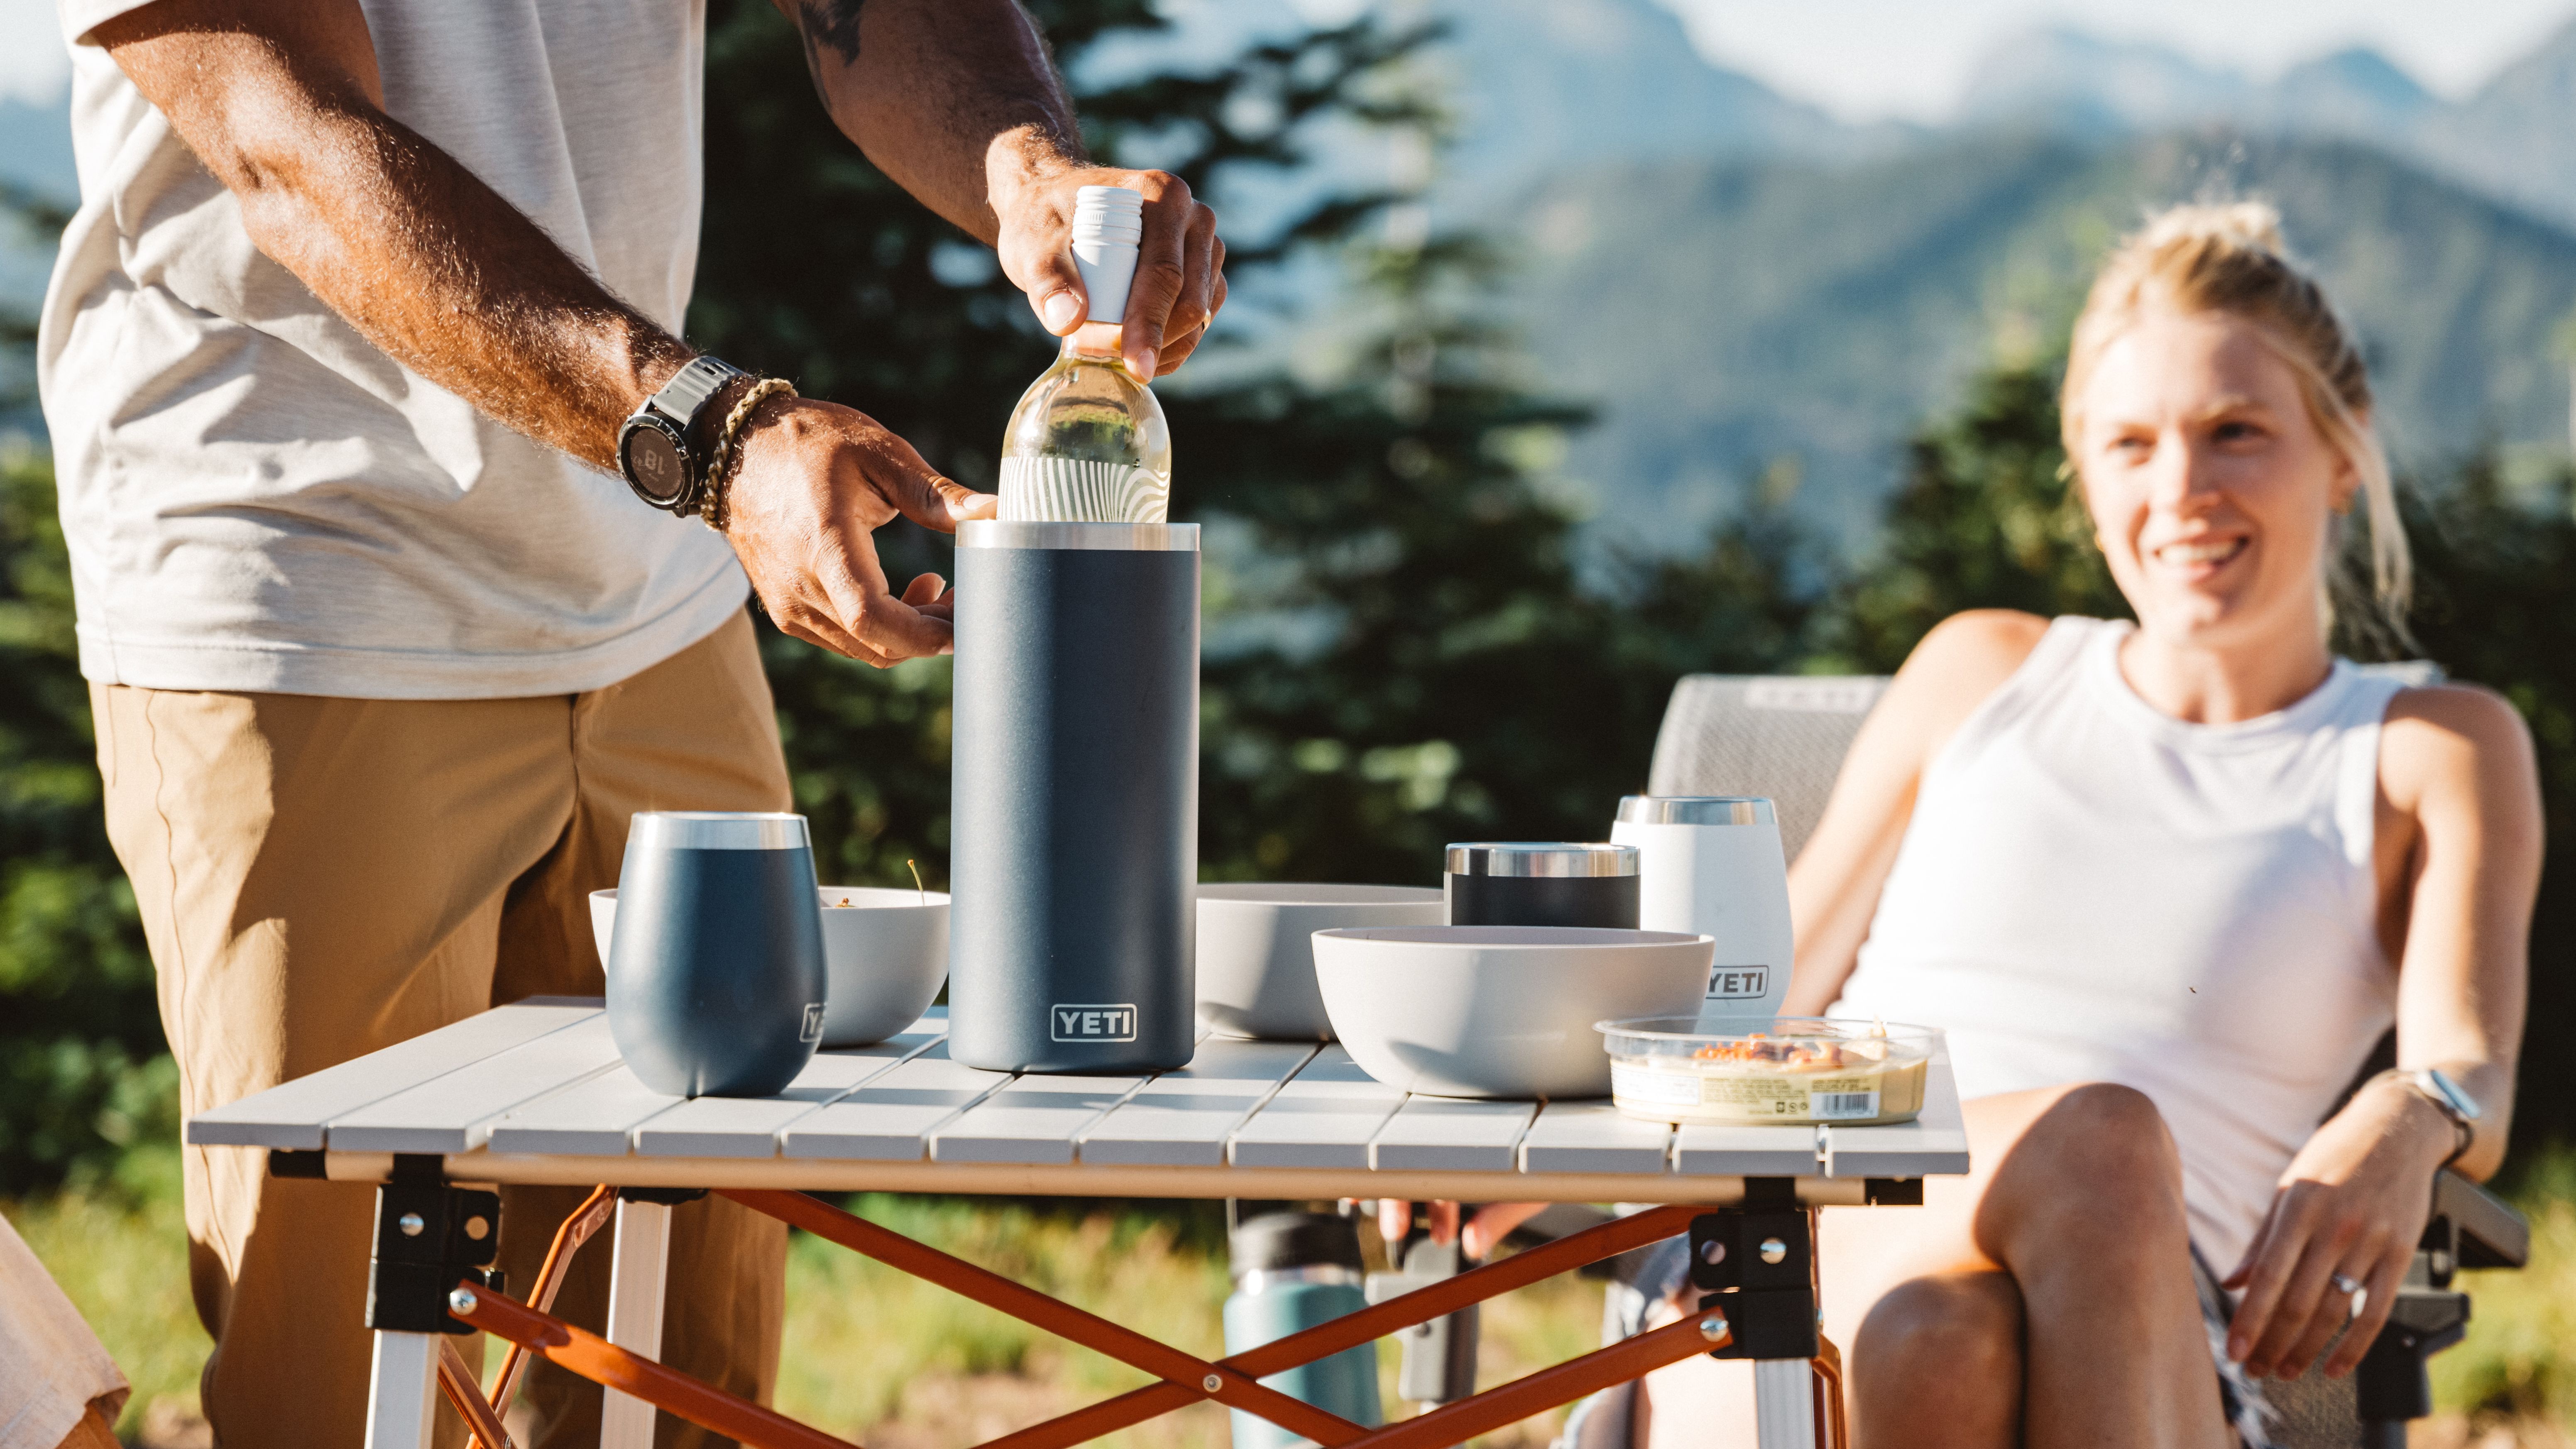 YETI - For Drinks That Are Just Right